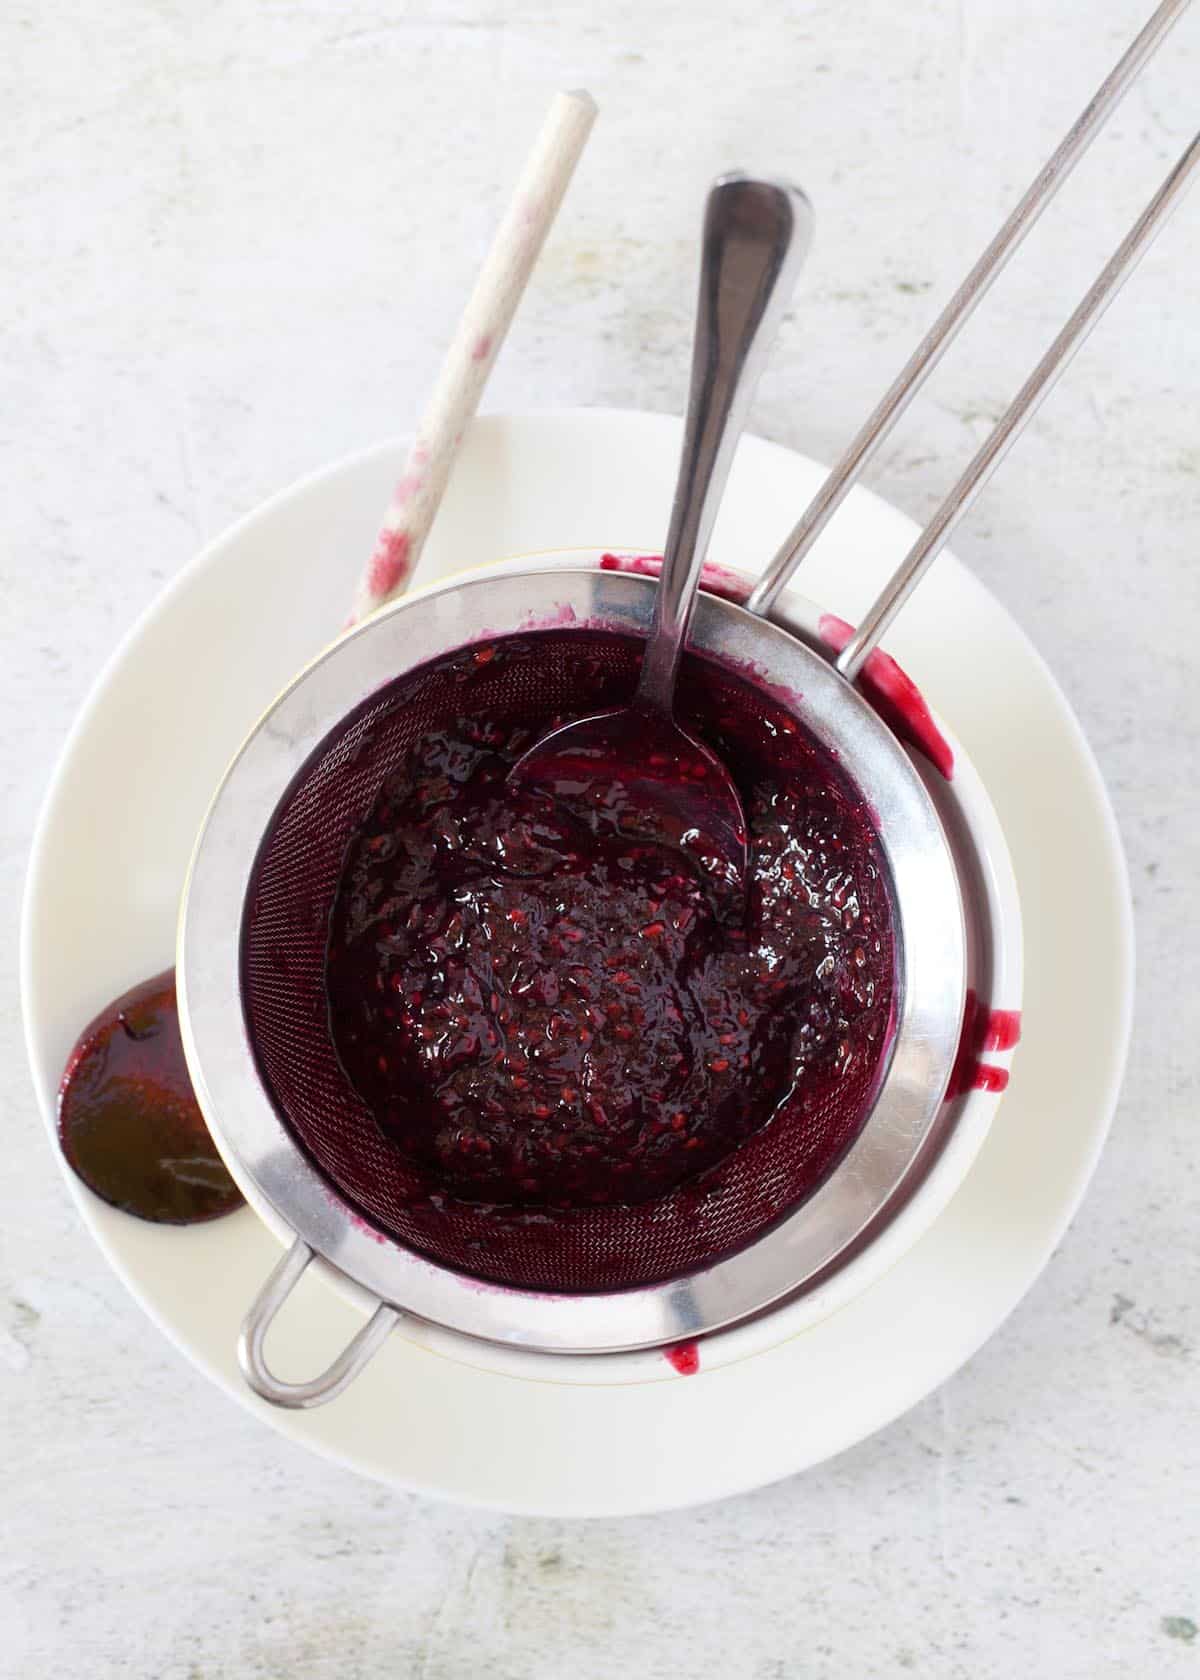 Blackberry compote being strained through a sieve